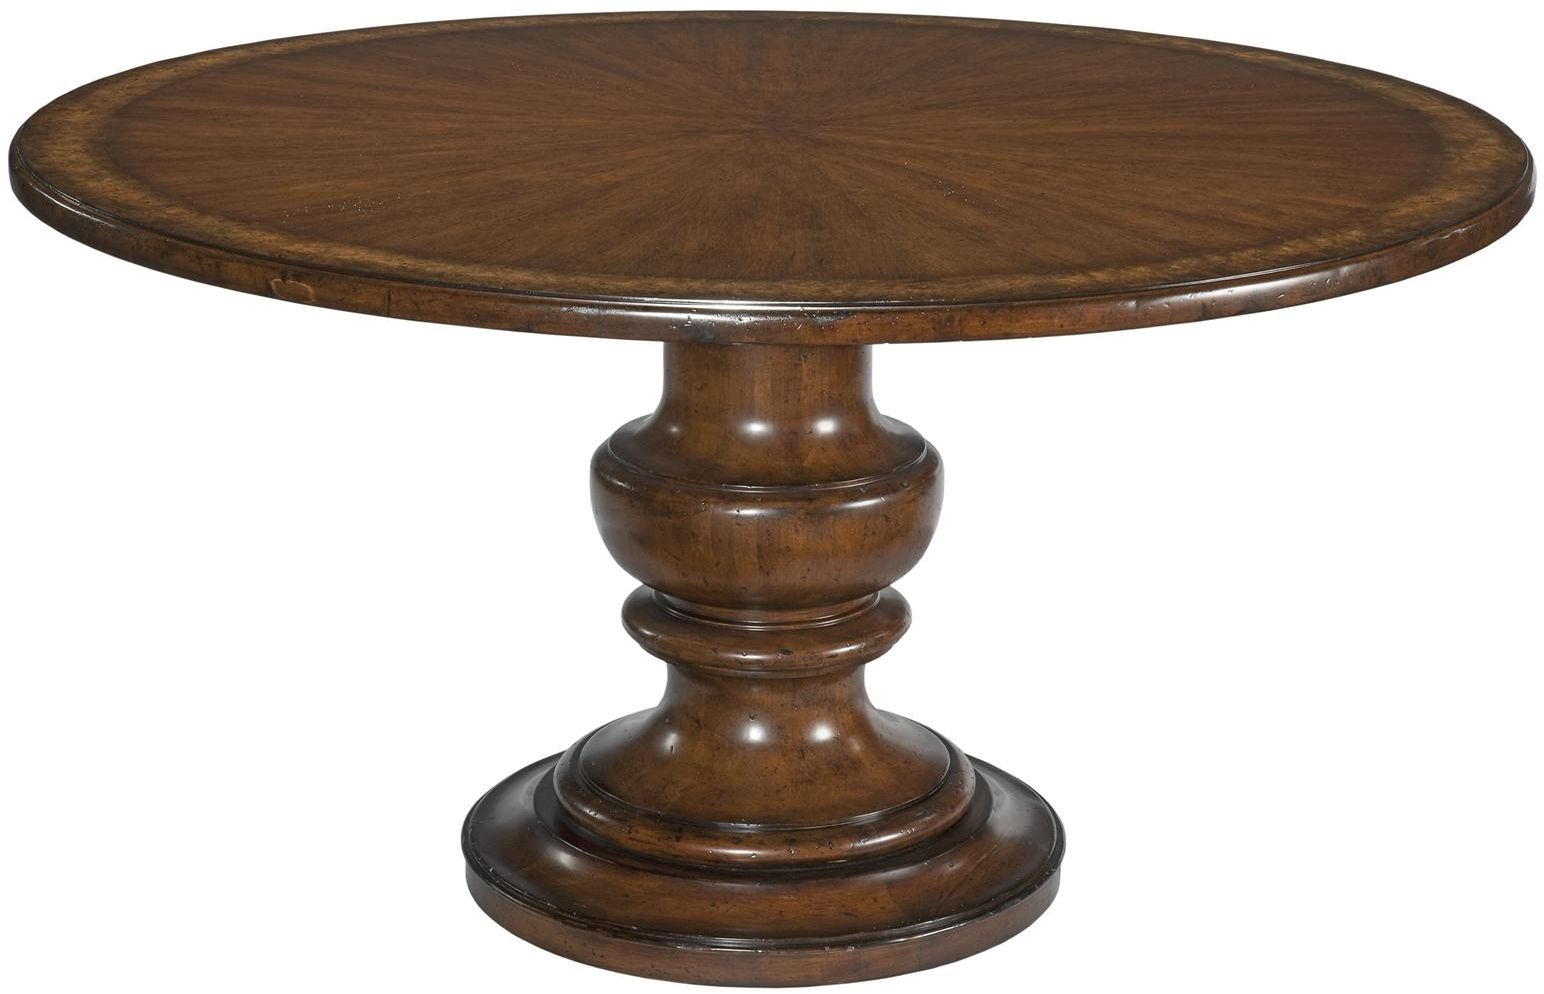 Well Known Dining Table: Round Pedestal Dining Table 72 Inch Pertaining To Serrato Pedestal Dining Tables (View 17 of 20)